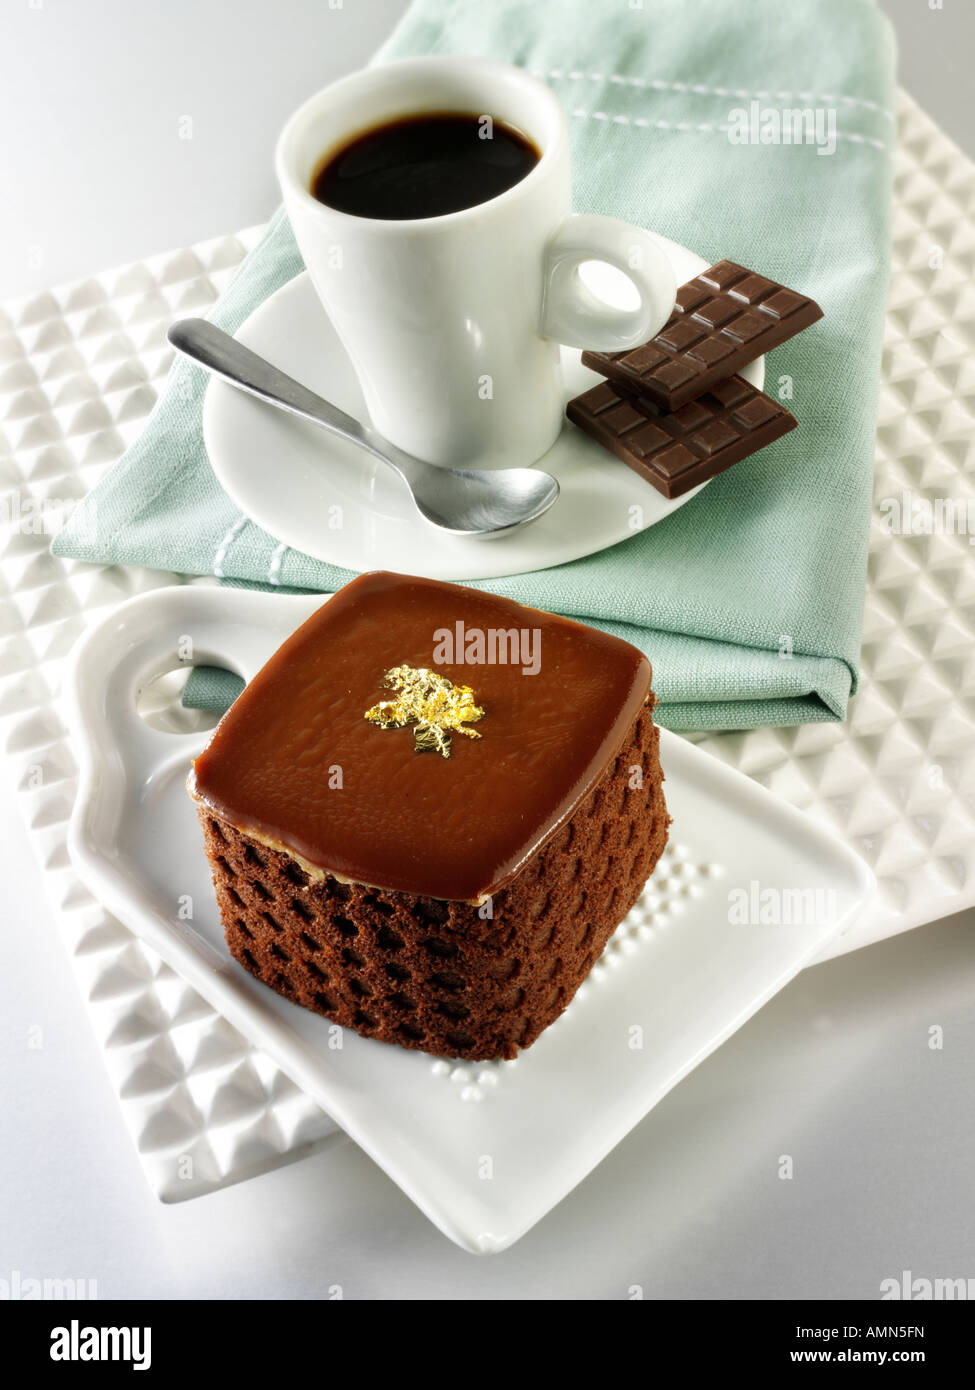 A hand made patisserie speciality rich indulgent chocolate cake filled with with coffee in a white table setting Stock Photo